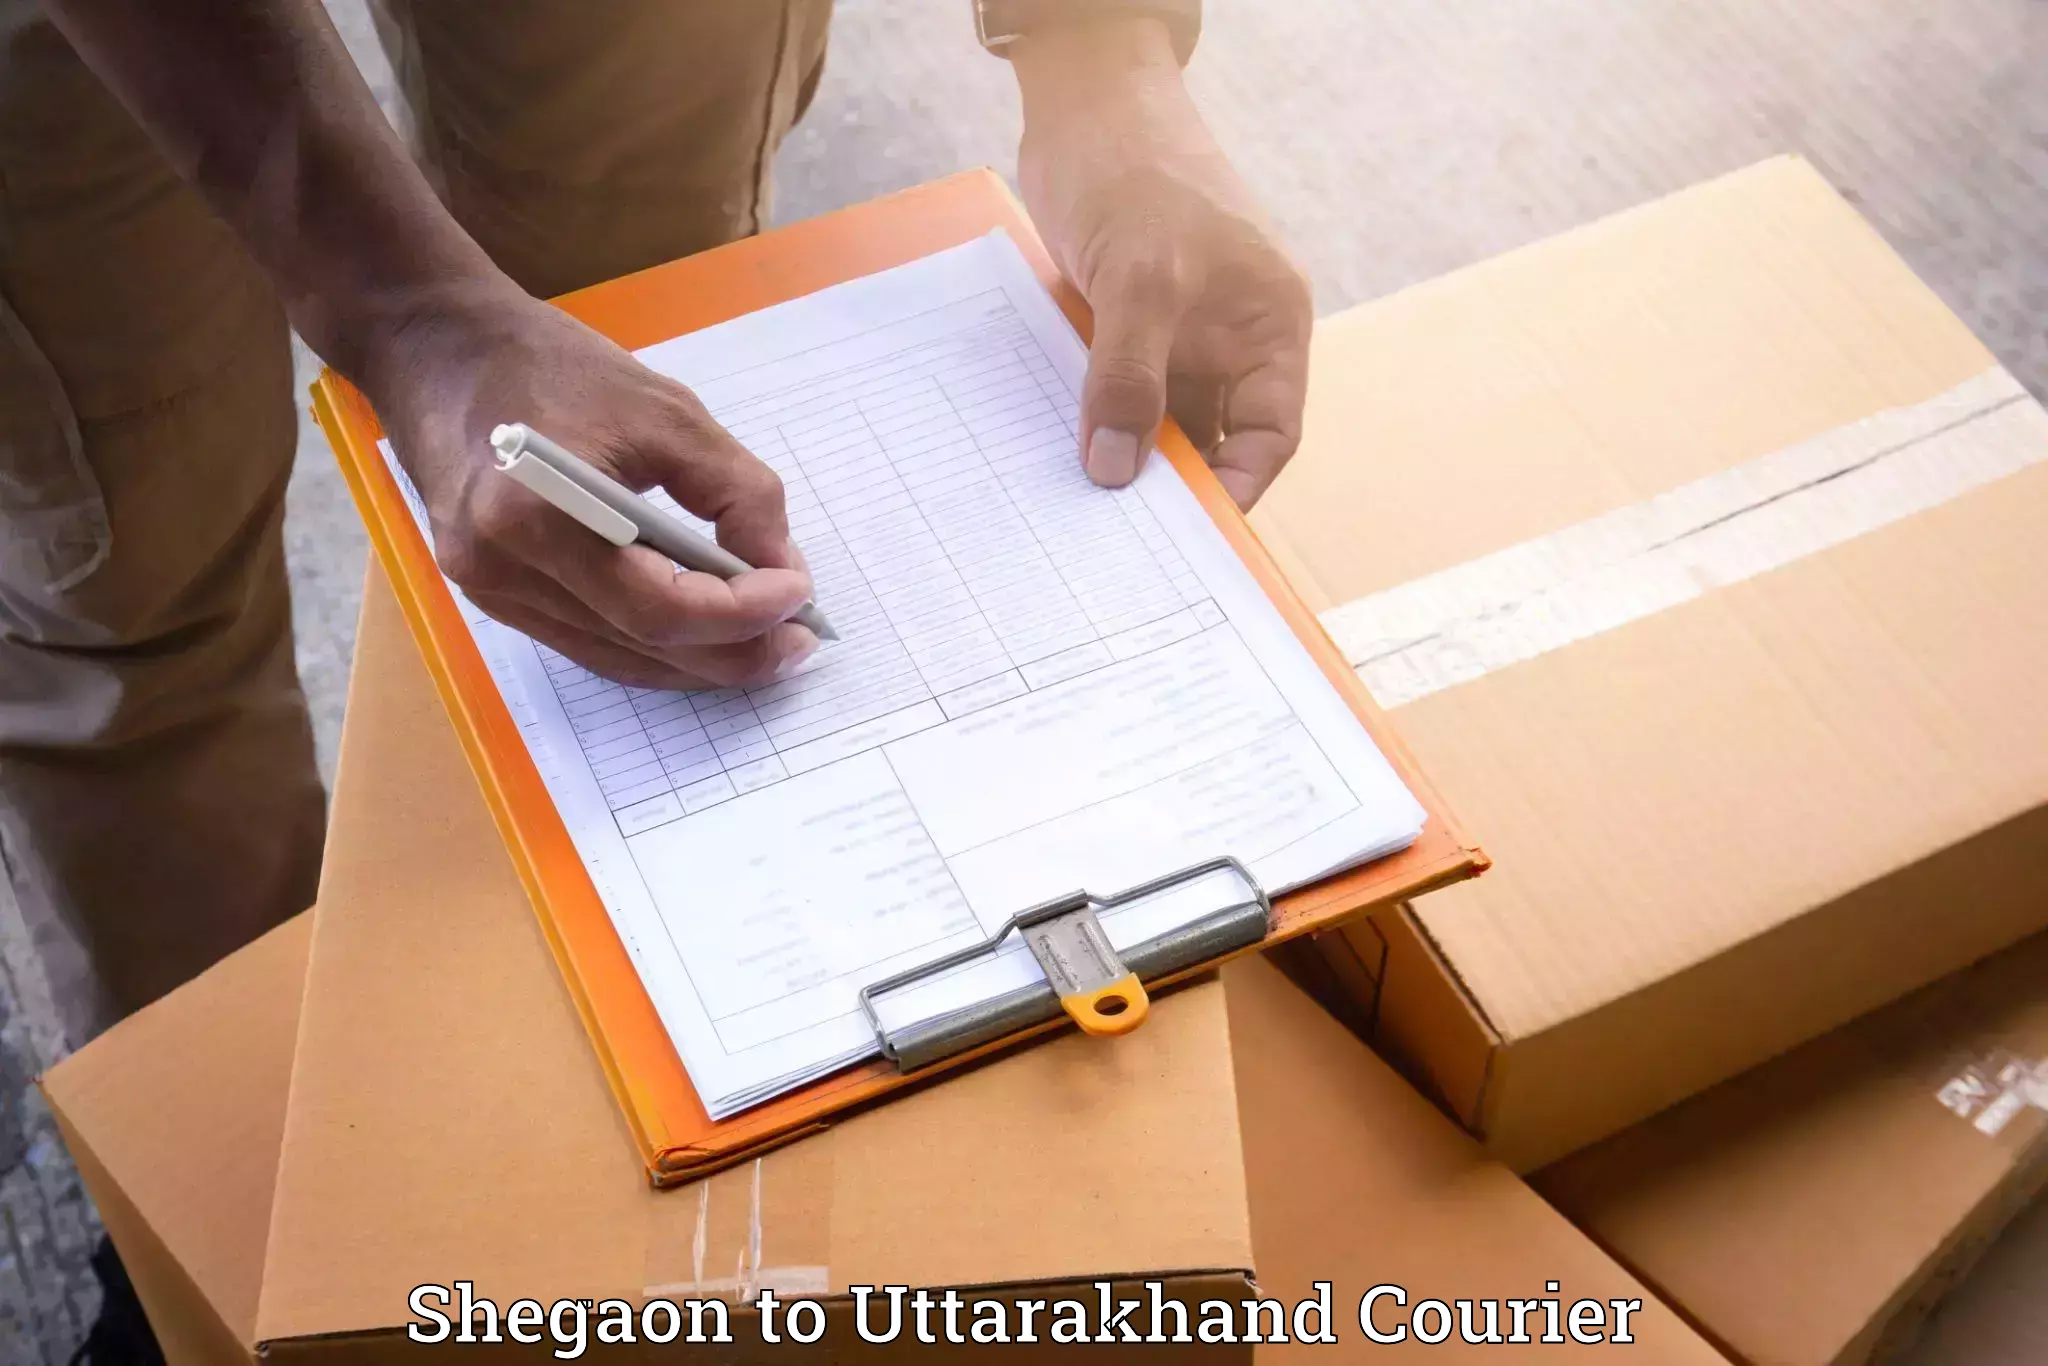 Furniture delivery service Shegaon to Didihat